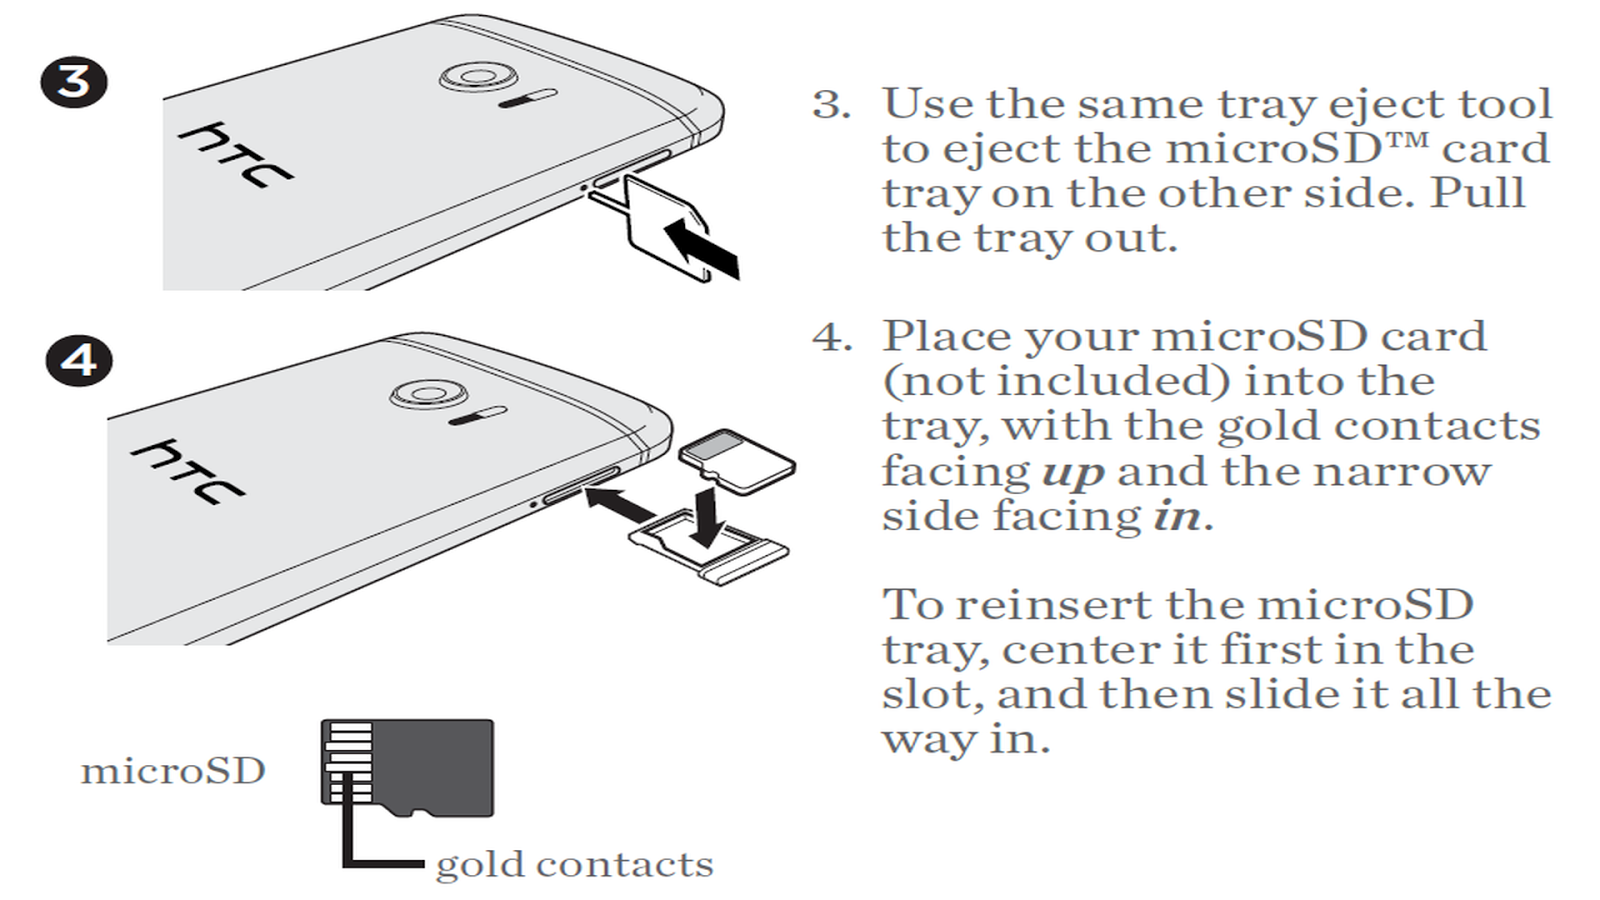 HTC10Manual: How to Inserting Nano SIM and microSD cards on HTC 10